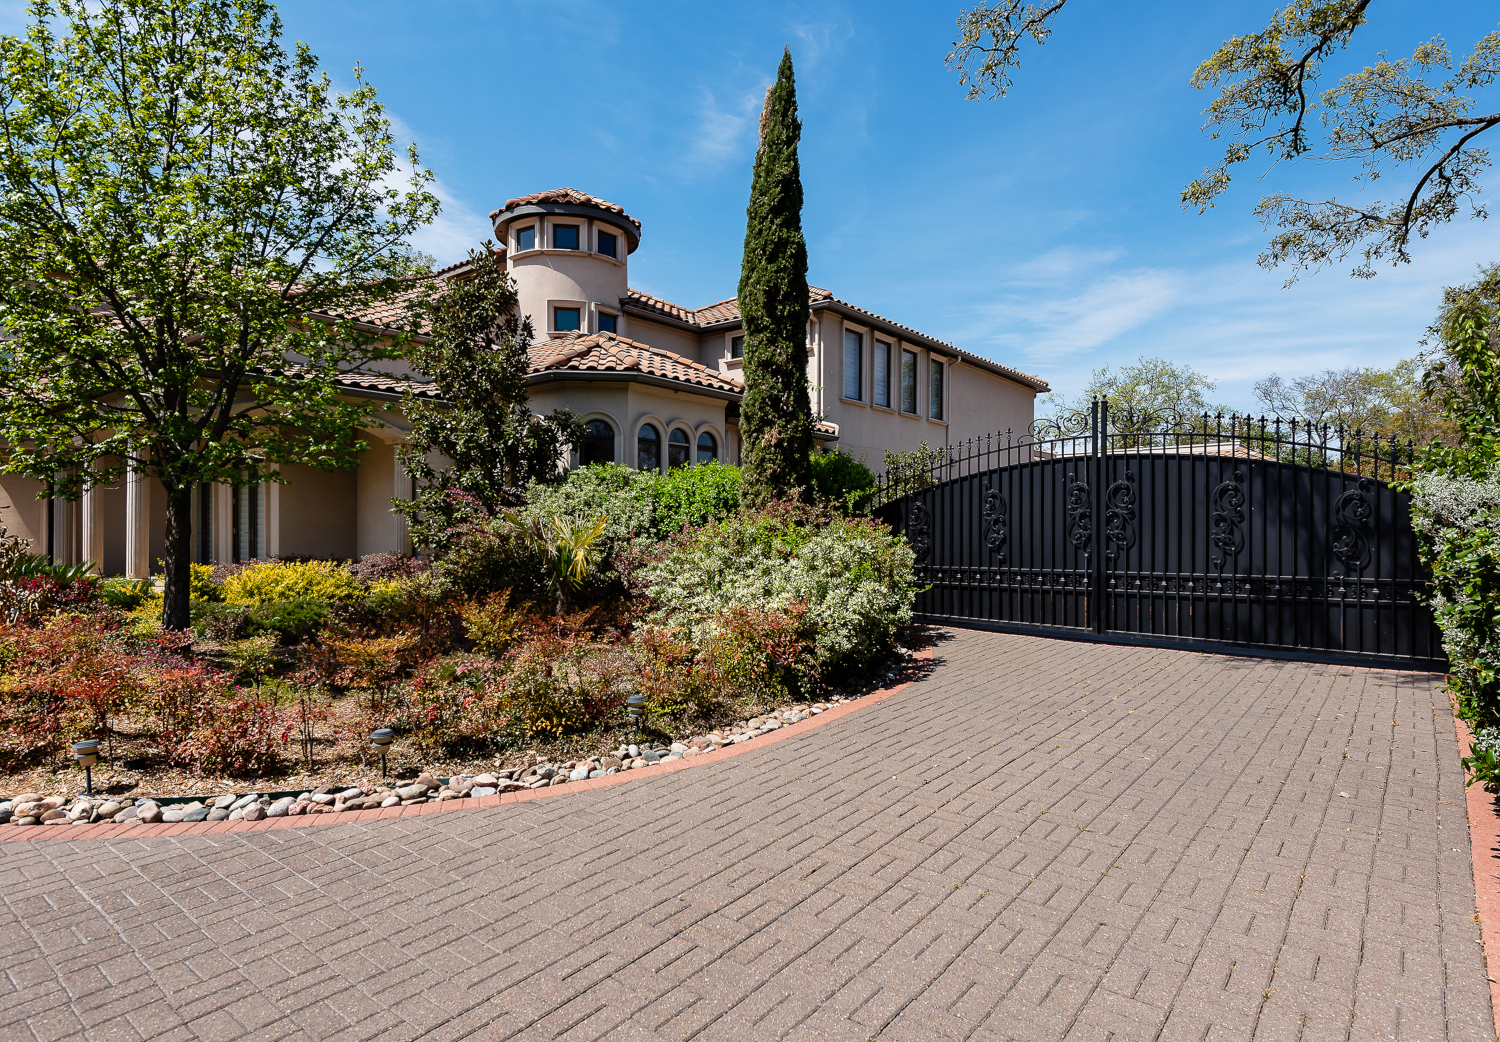 Gated entry with double car circular drive